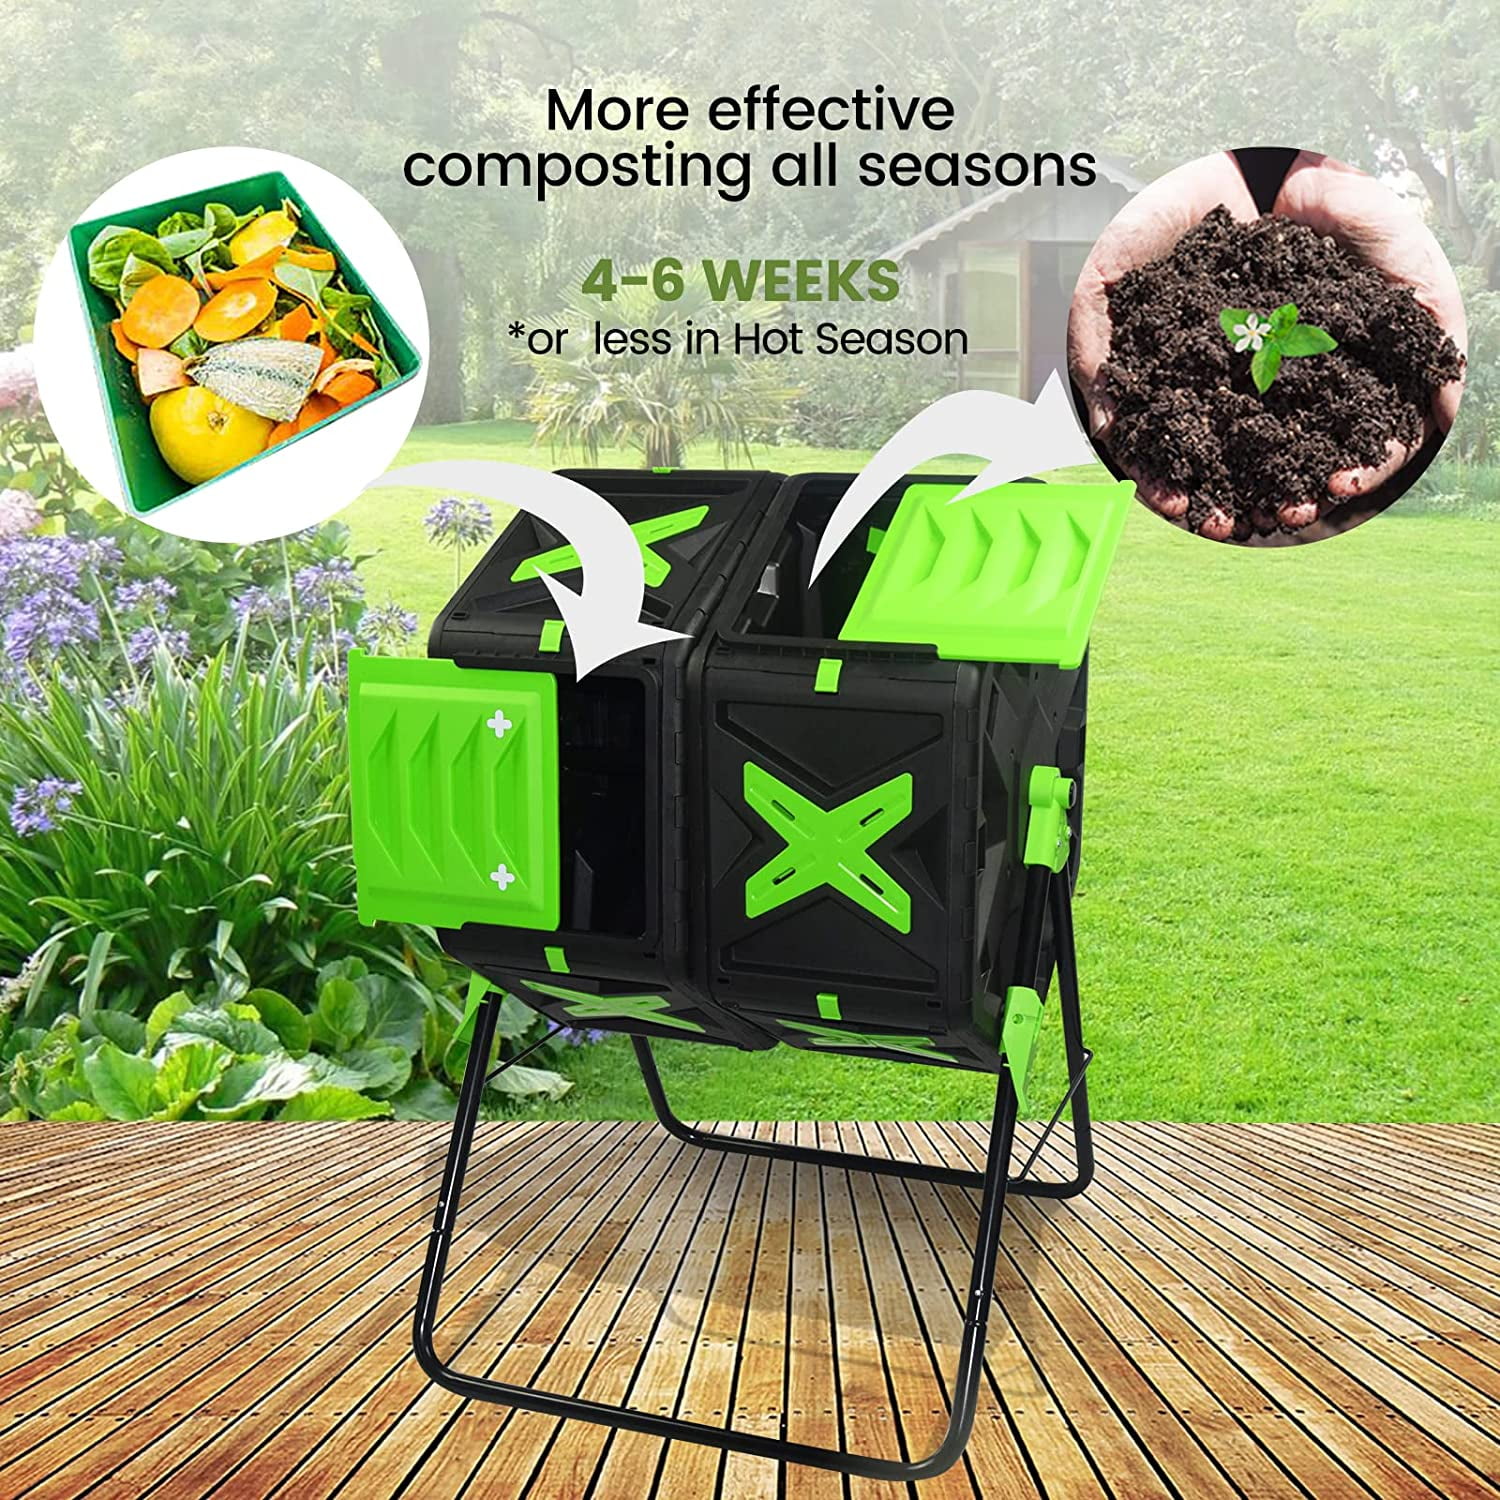 Tumbling Compost Bin, Large Compost Tumbler Bin, Outdoor Garden Composting  Tumbler, Heavy Duty Capacity Composter, for Farm/Kitchen